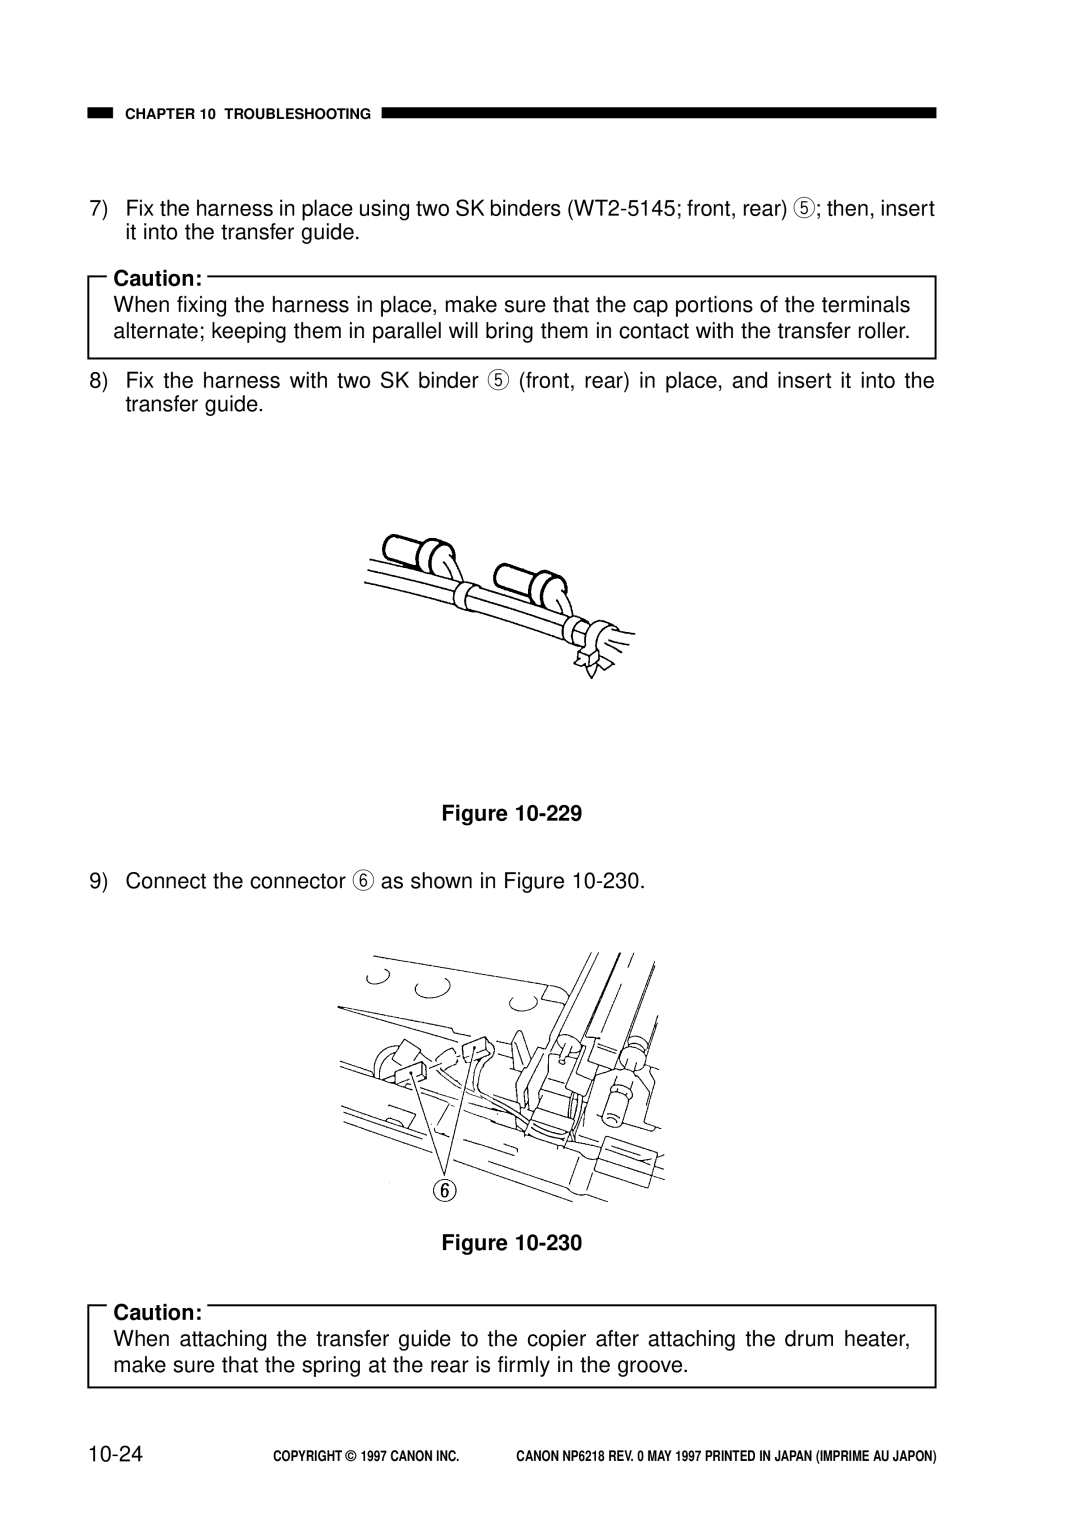 Canon NP6218, FY8-13EX-000 service manual 10-24, Connect the connector y as shown in Figure 